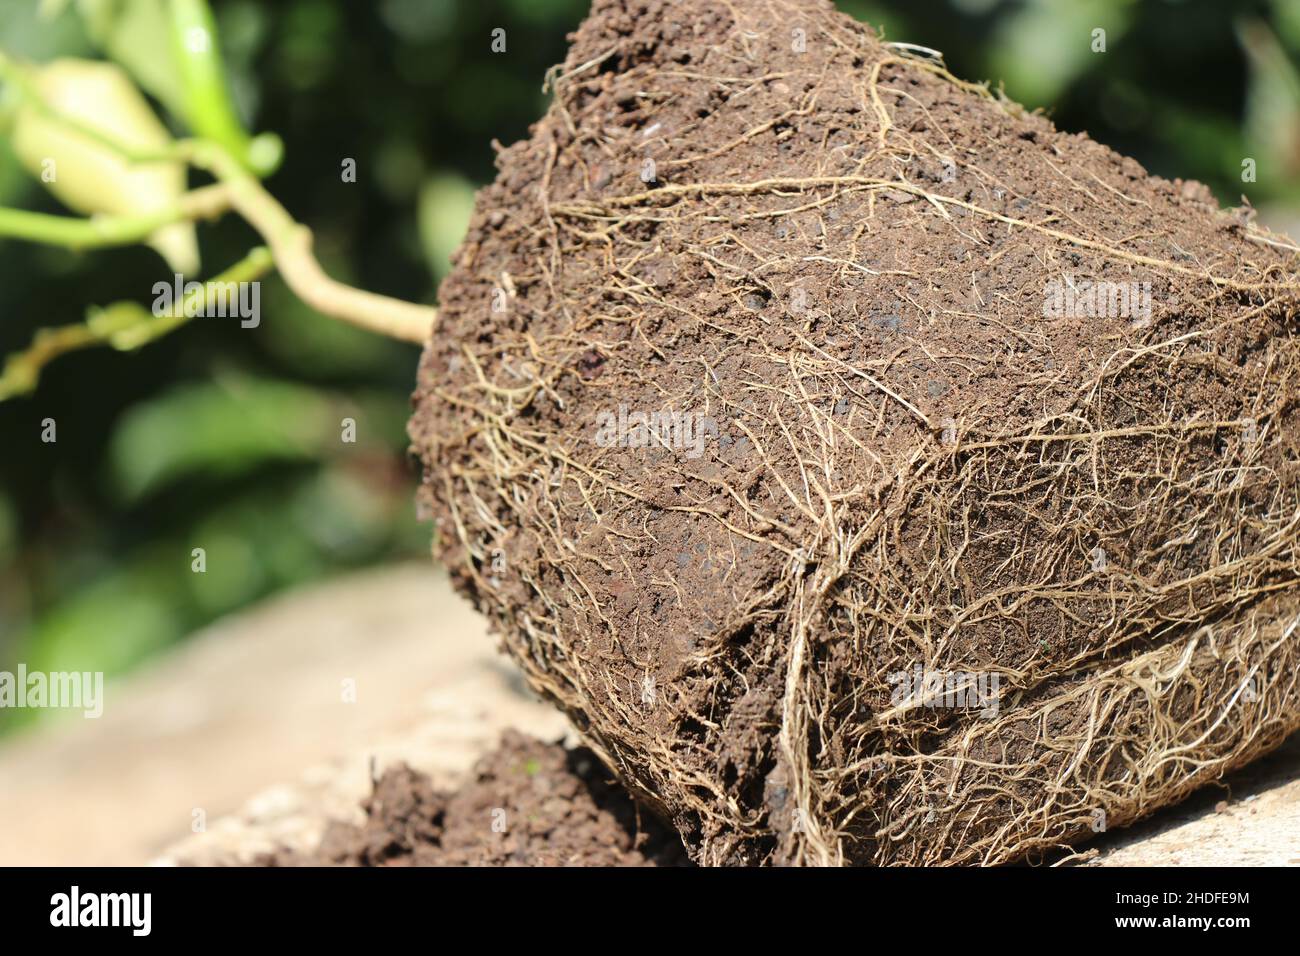 The root system on the green chili plant close up. Chili plant removed from the pot Stock Photo